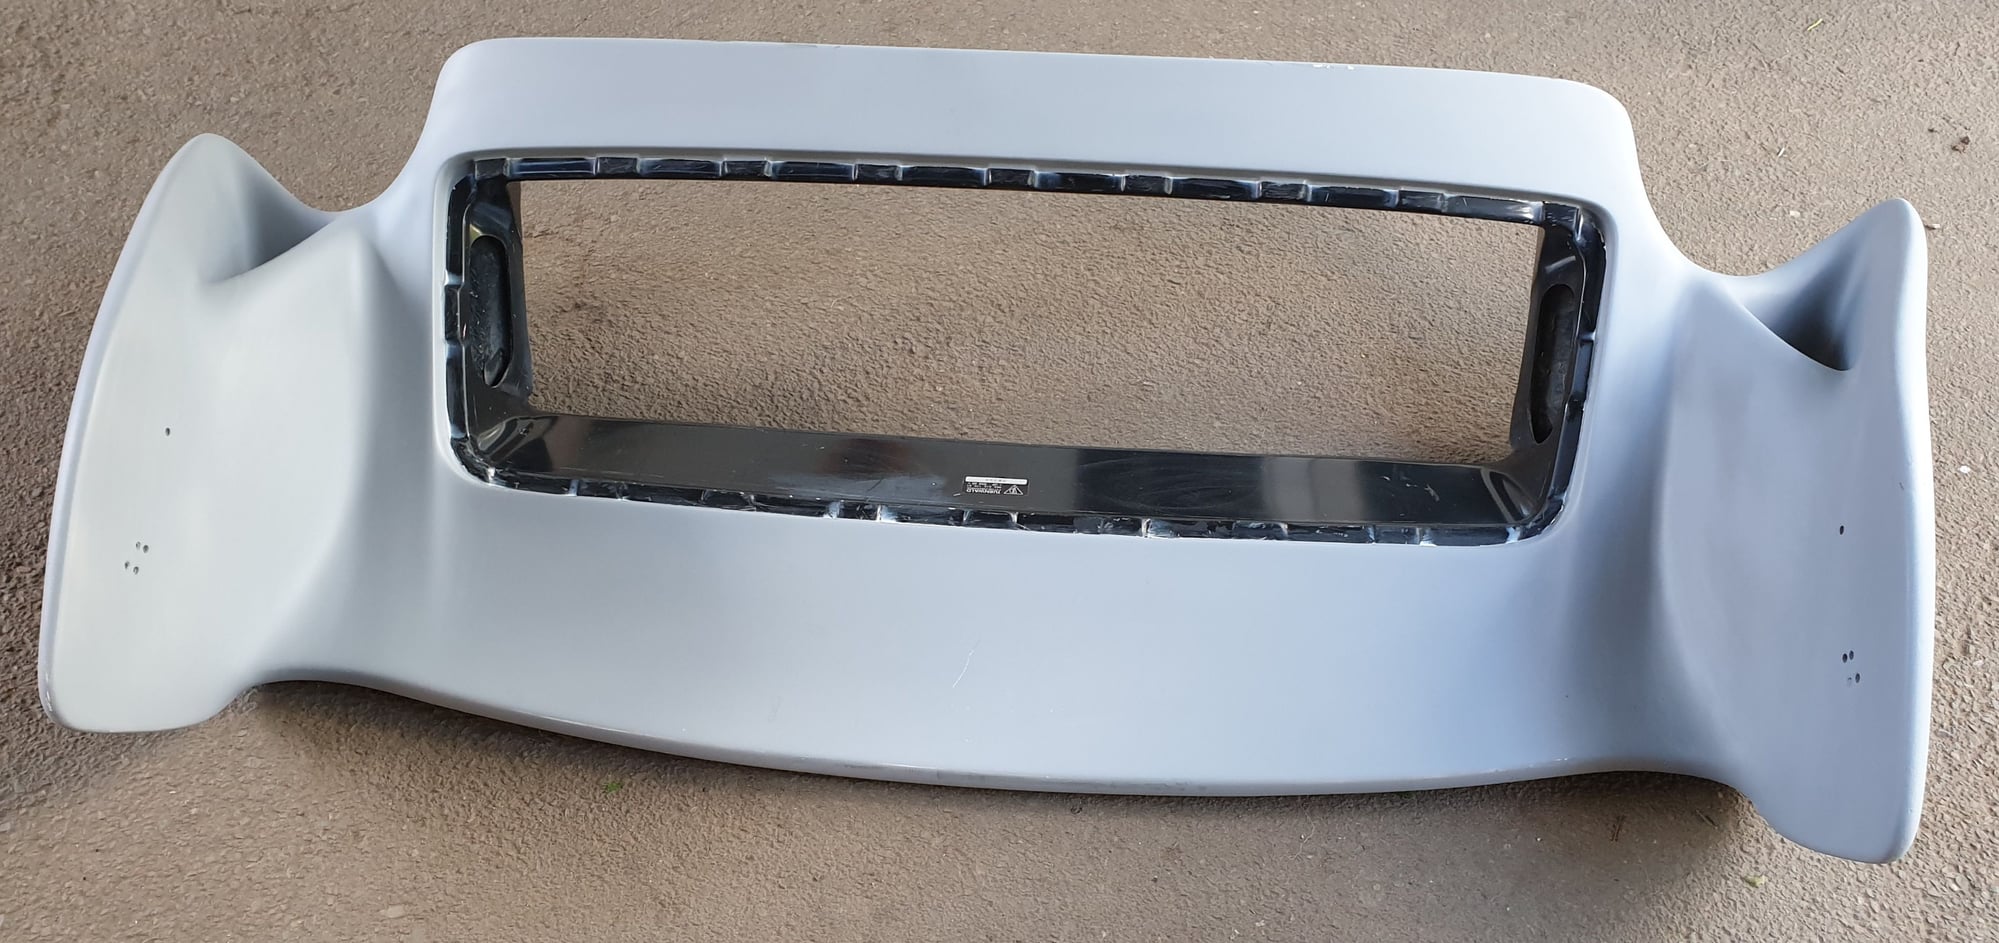 993 RS M008 "Turnwald" Clubsport original rear spoiler for sale